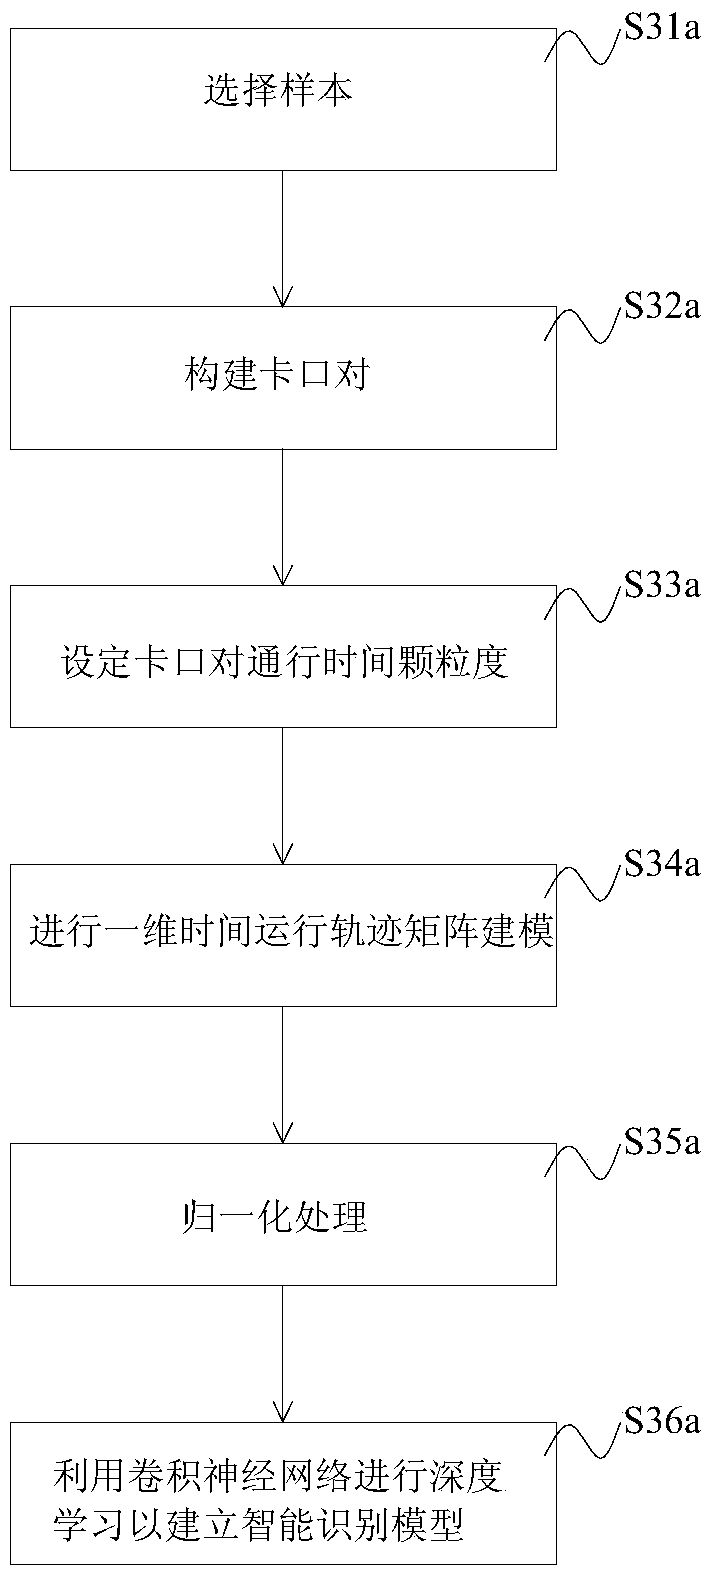 Method and system for identifying illegally-operated vehicles and computer readable storage medium